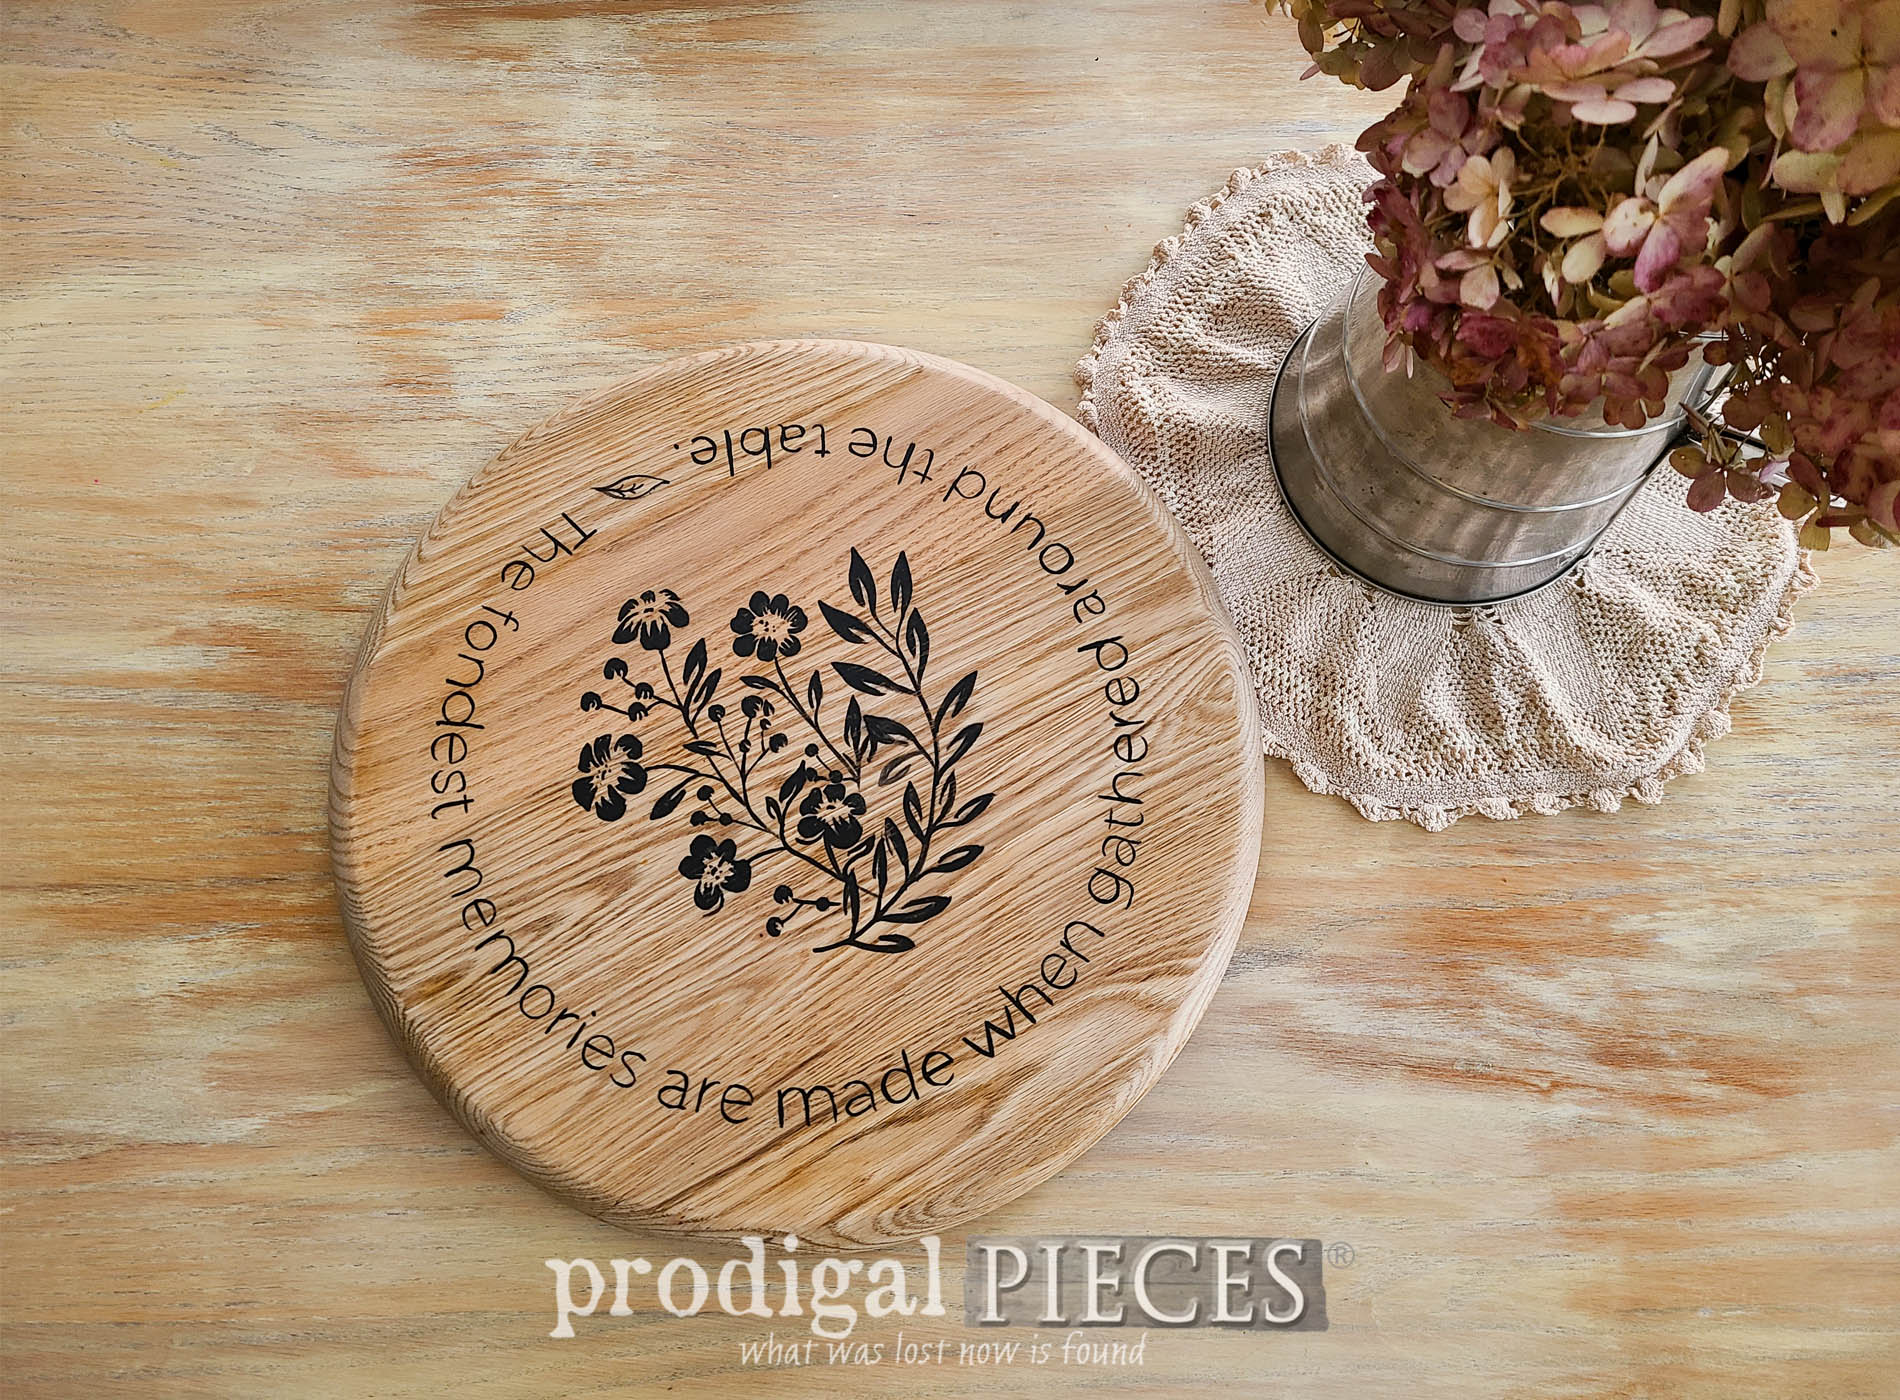 Featured Upcycled Lazy Susan for Farmhouse Decor by Larissa of Prodigal Pieces | prodigalpieces.com #prodigalpieces #diy #farmhouse #home